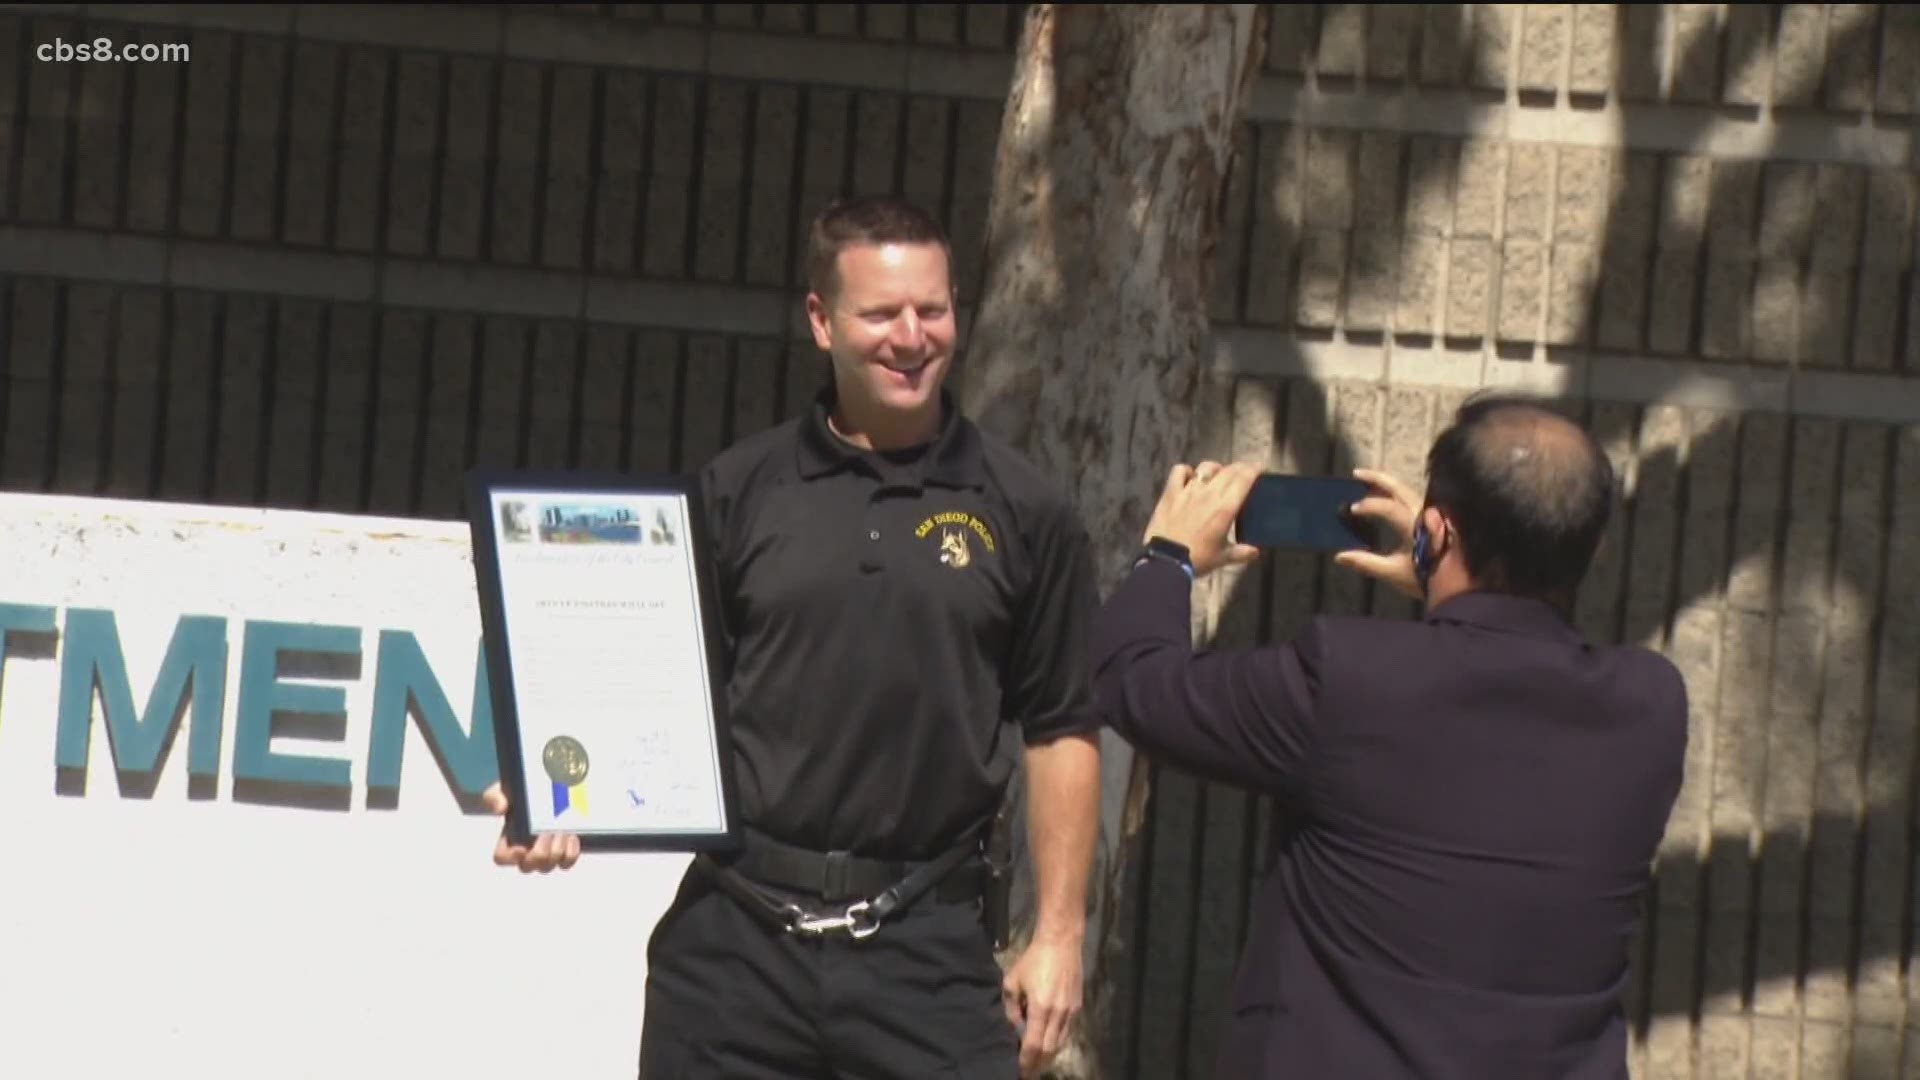 Ofcr. Jonathan Wiese helped rescue twin toddler girls when their father's car went off Sunset Cliffs. He also helped arrest the Poway Synagogue shooter in 2019.